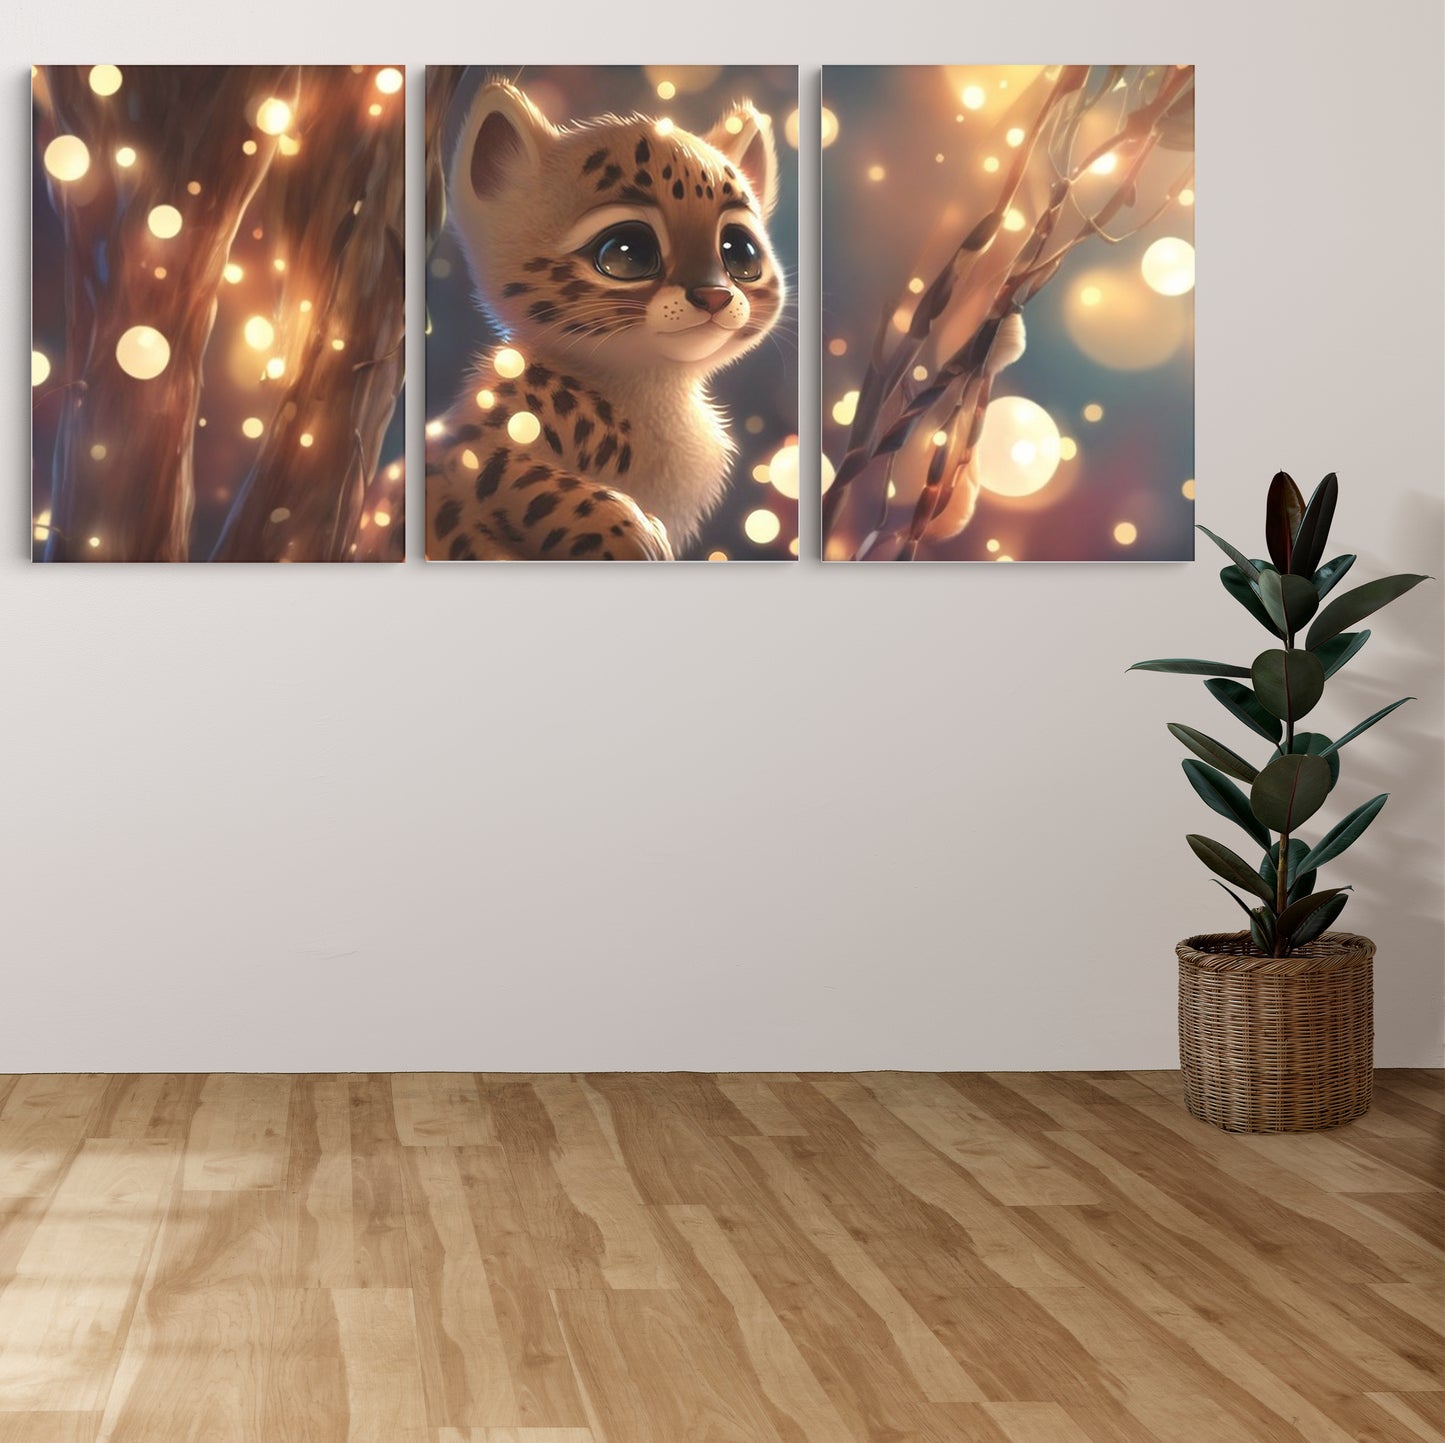 Adorable Whiskers: Captivating Wall Art Celebrating the Irresistible Charm of a Cute Baby Cat - S06E04